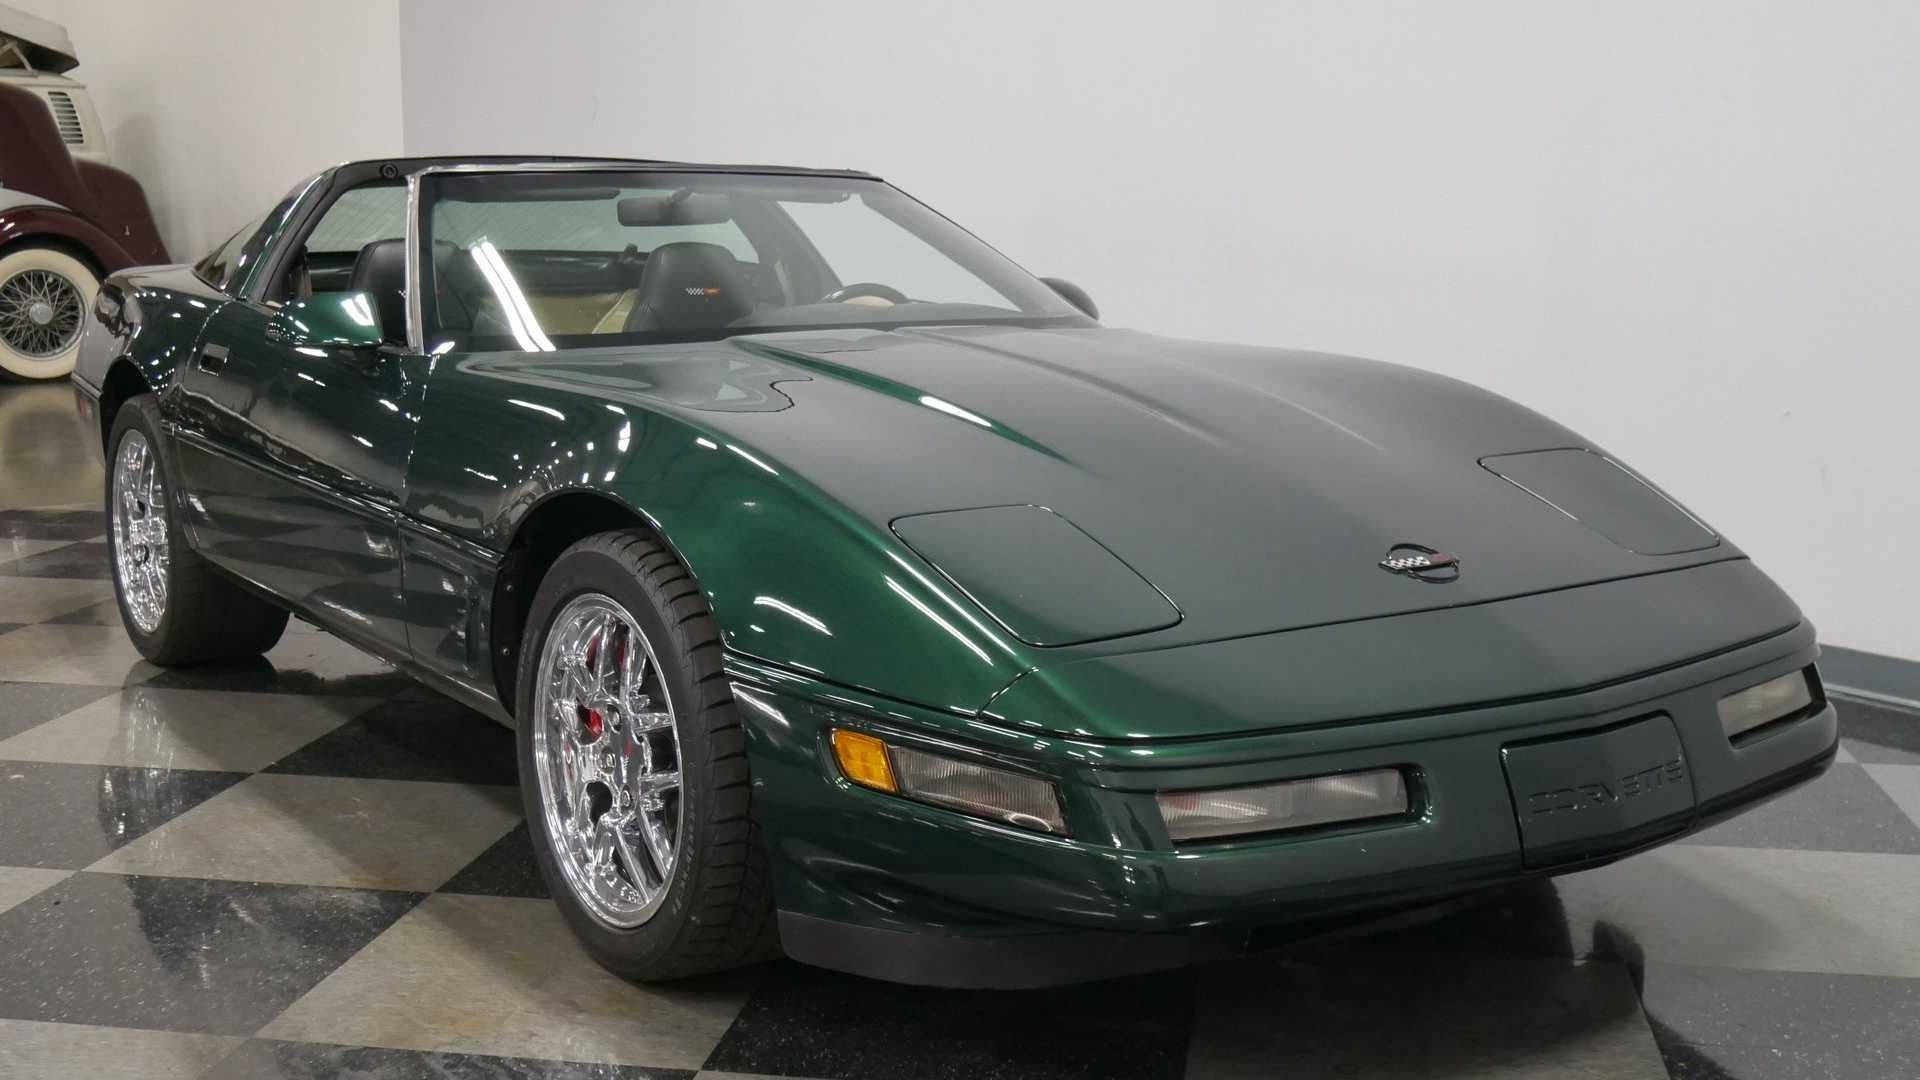 The Power and Elegance of the C4 Corvette Wallpaper